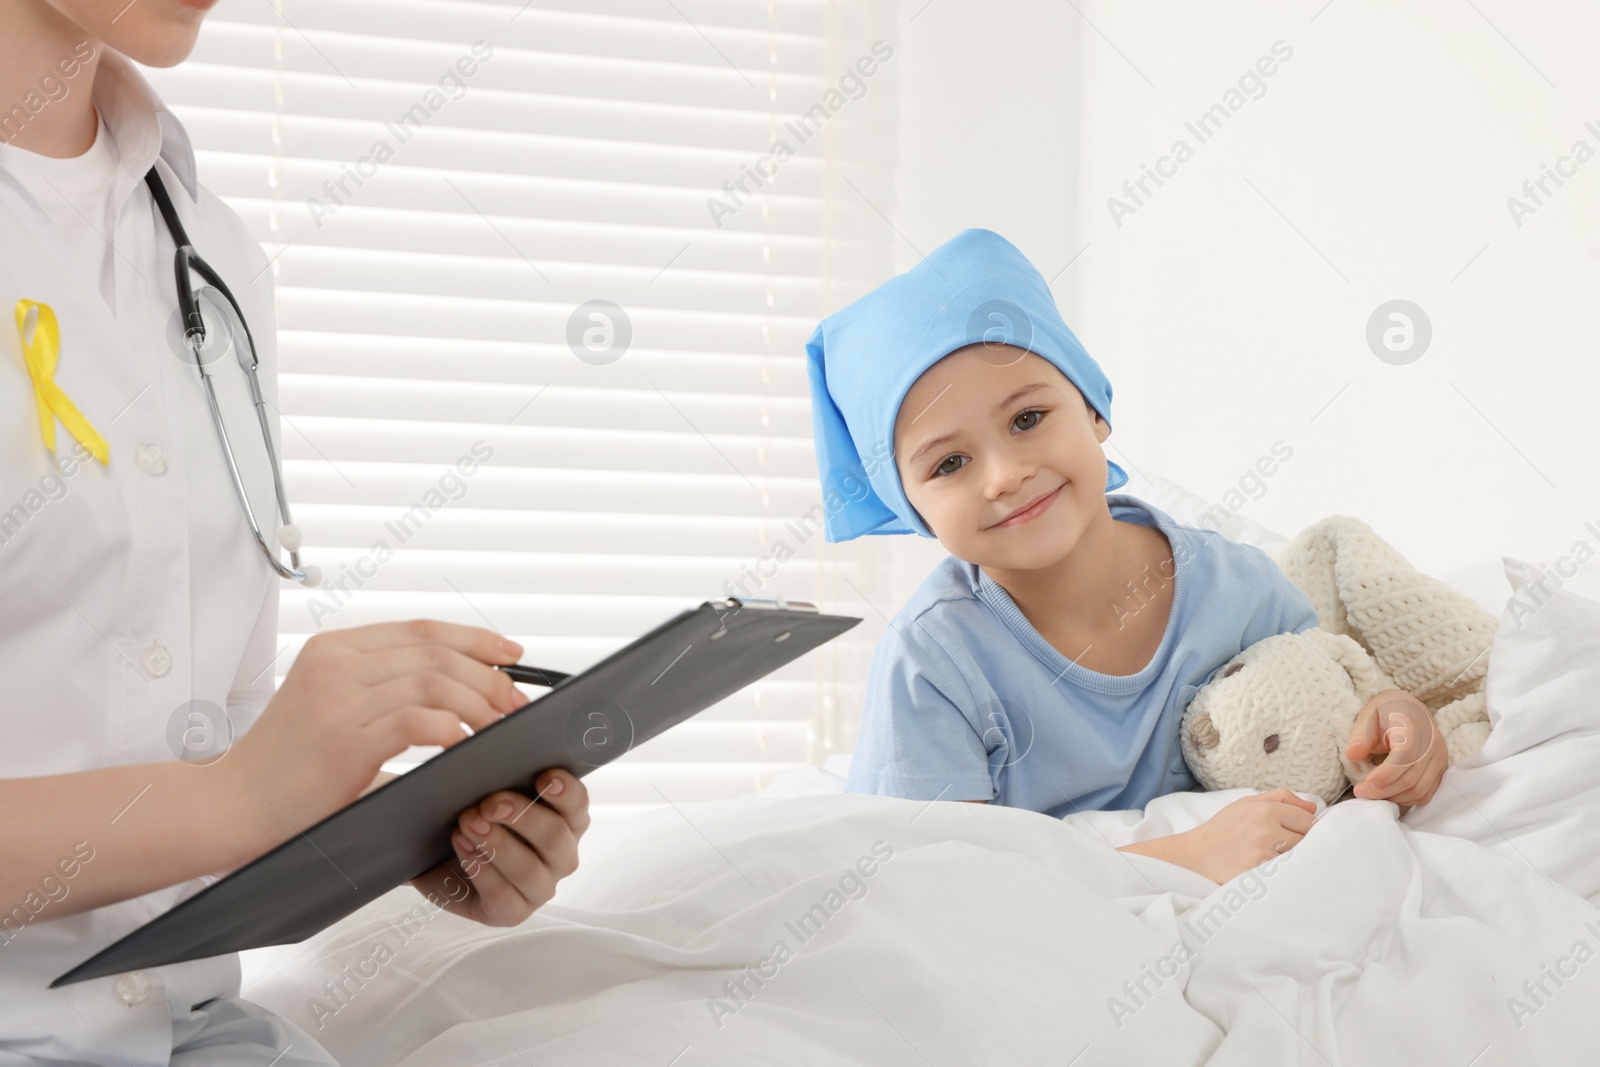 Photo of Childhood cancer. Doctor with clipboard and little patient with toy bunny in hospital